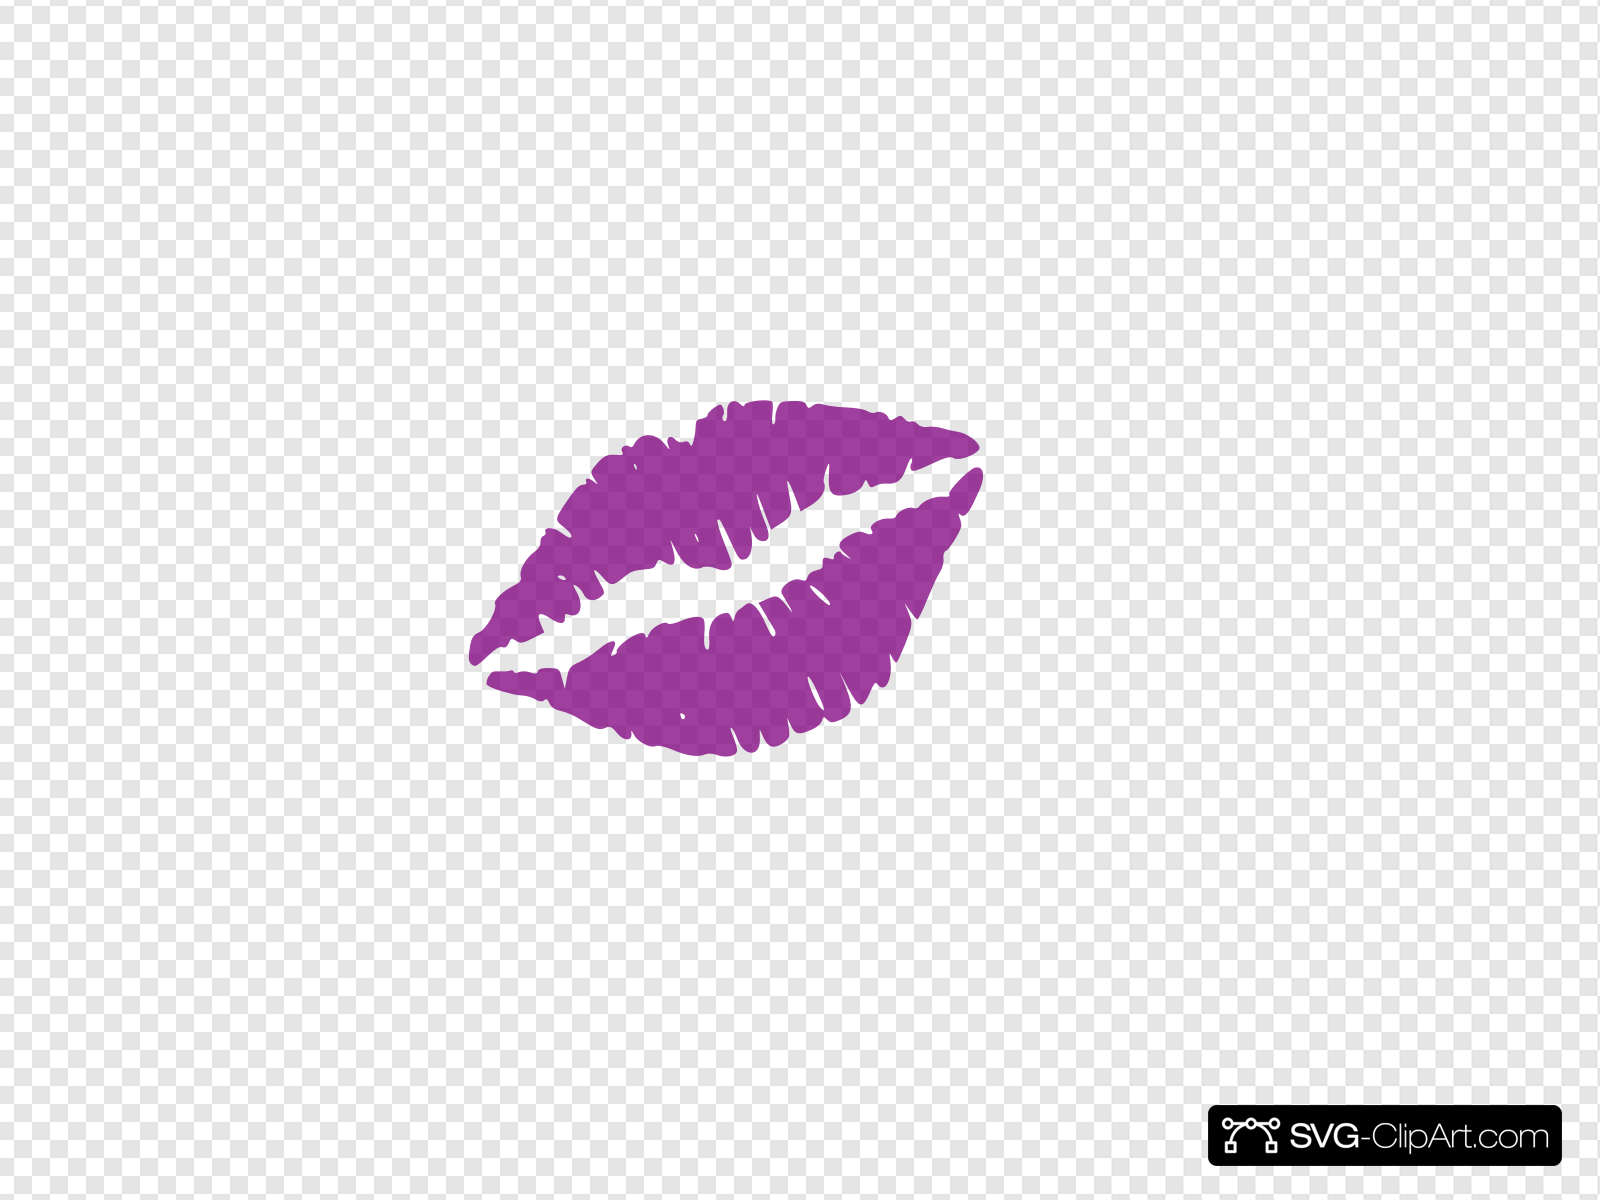 Lips Vector Clip art, Icon and SVG.